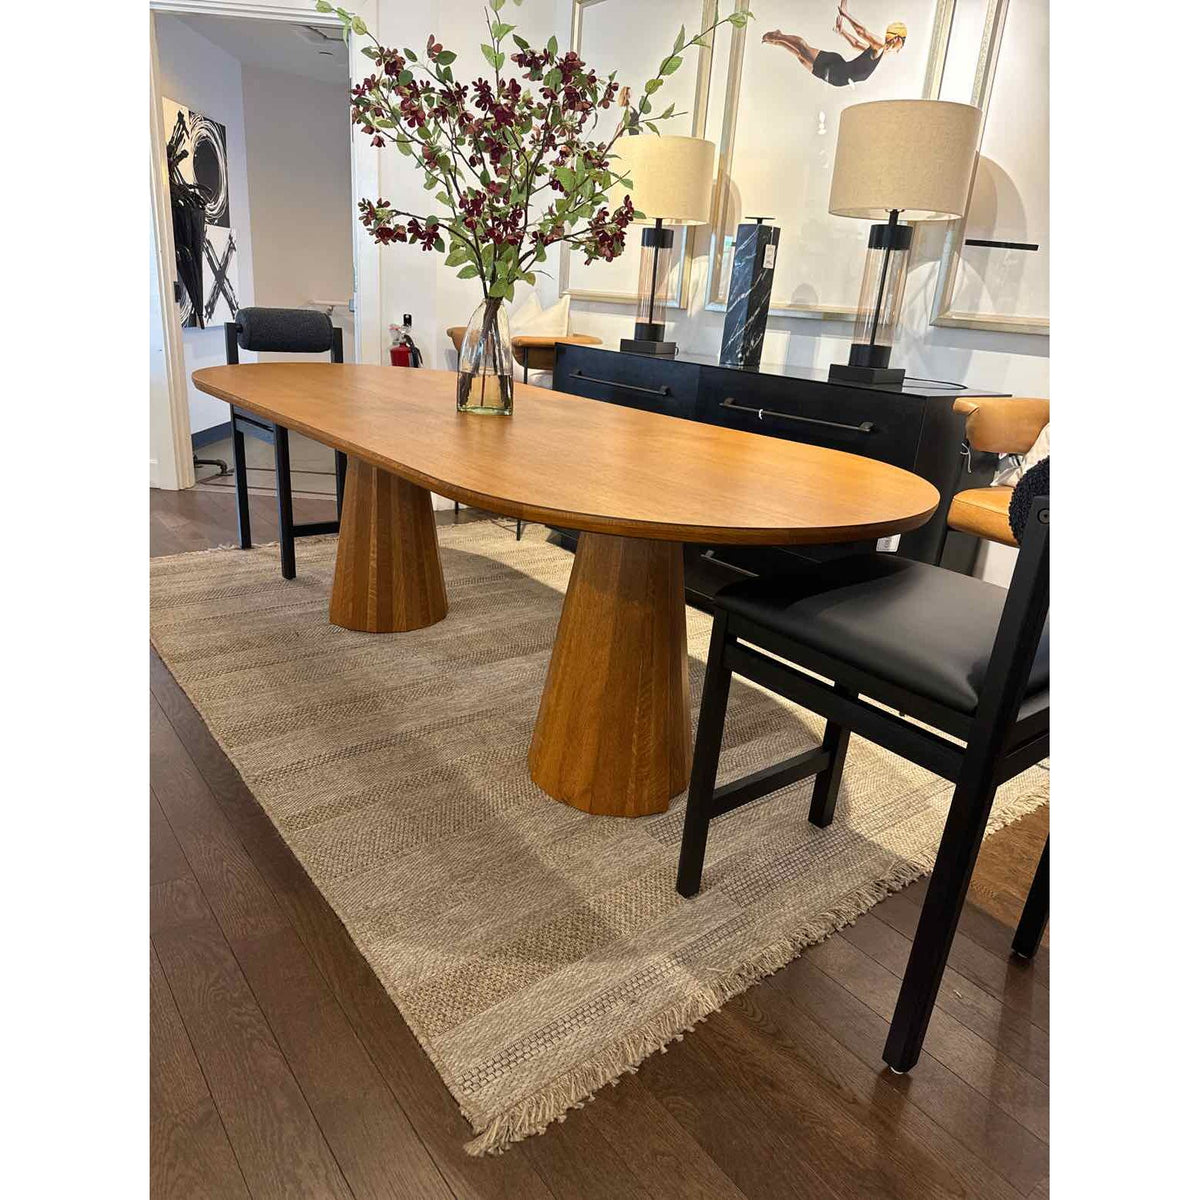 Custom Oval Dining Table in Golden Oiled Oak 96"Lx42"Wx30"H